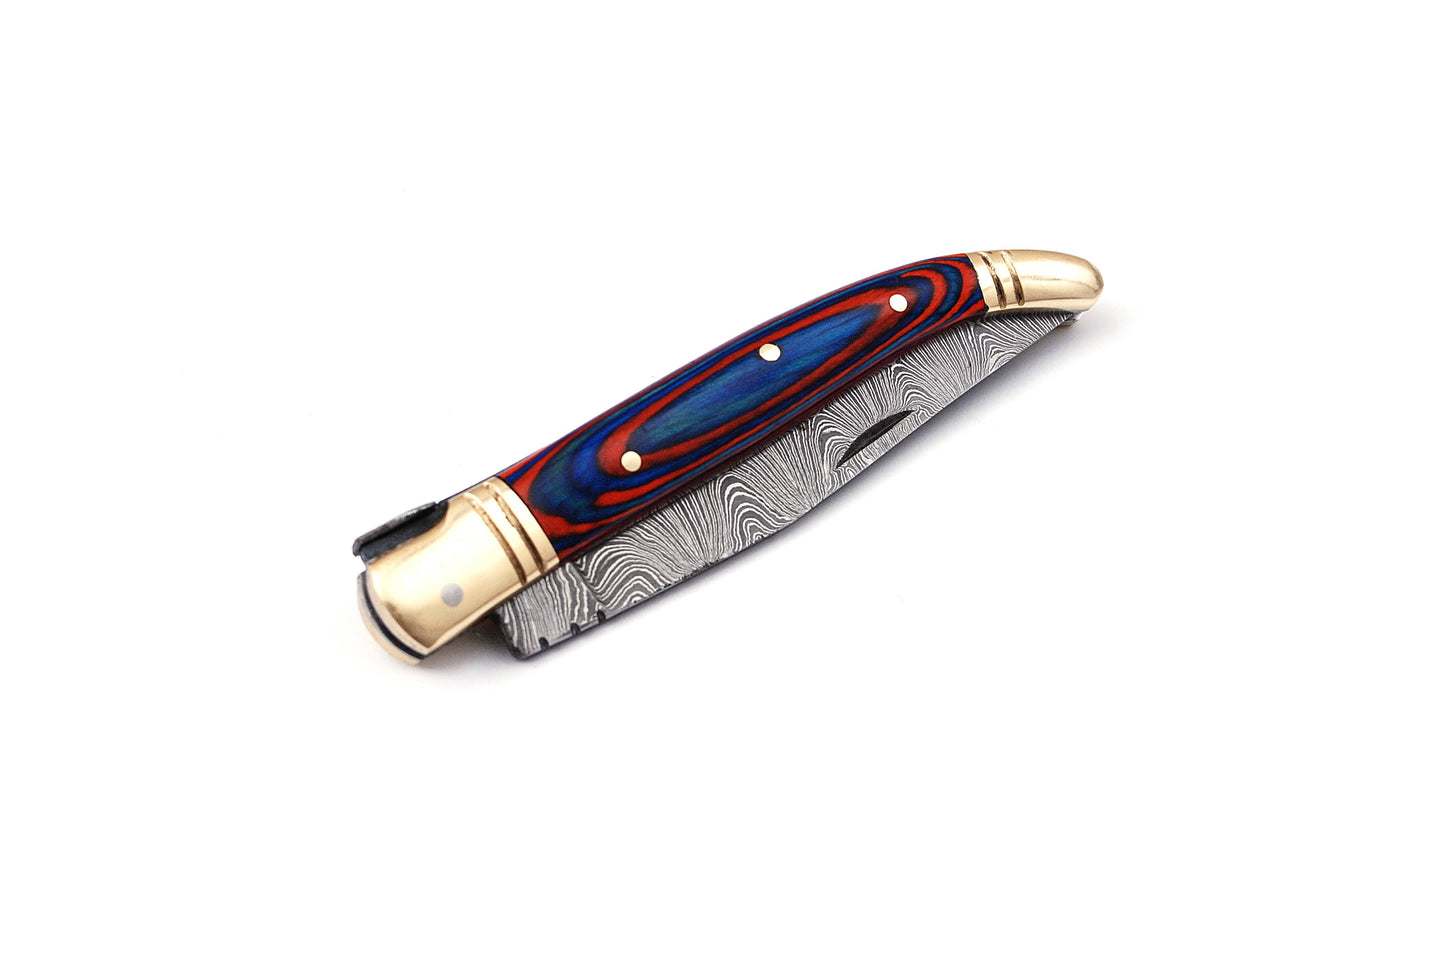 Copy of Laguiole Folding Damascus steel knife, 8.5" Long with 4" hand forged custom twist pattern Blade.Blue & Red wood scale with brass bolster, Cow hide leather sheath included